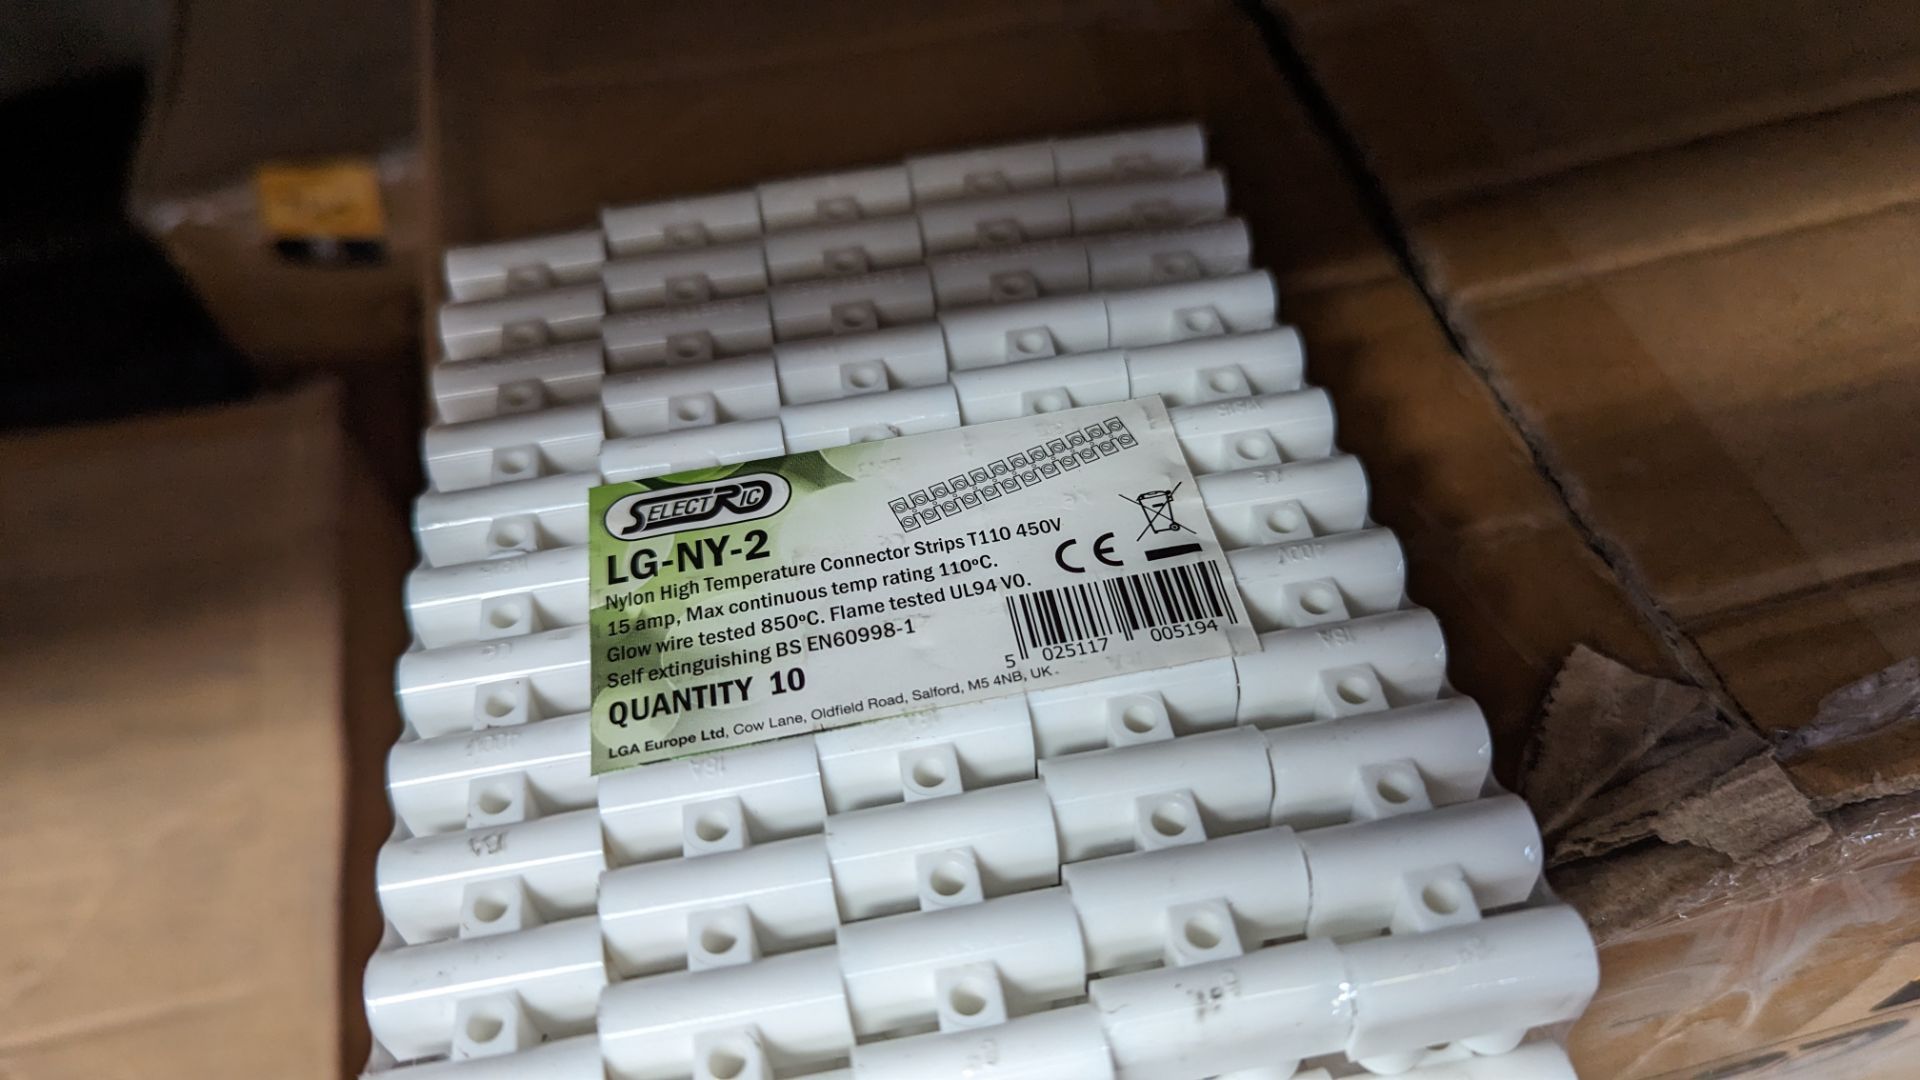 2 boxes (1,000 pieces total) of Selectric LG-NY-2 nylon high temperature connector strips, 15 amp - Image 5 of 5